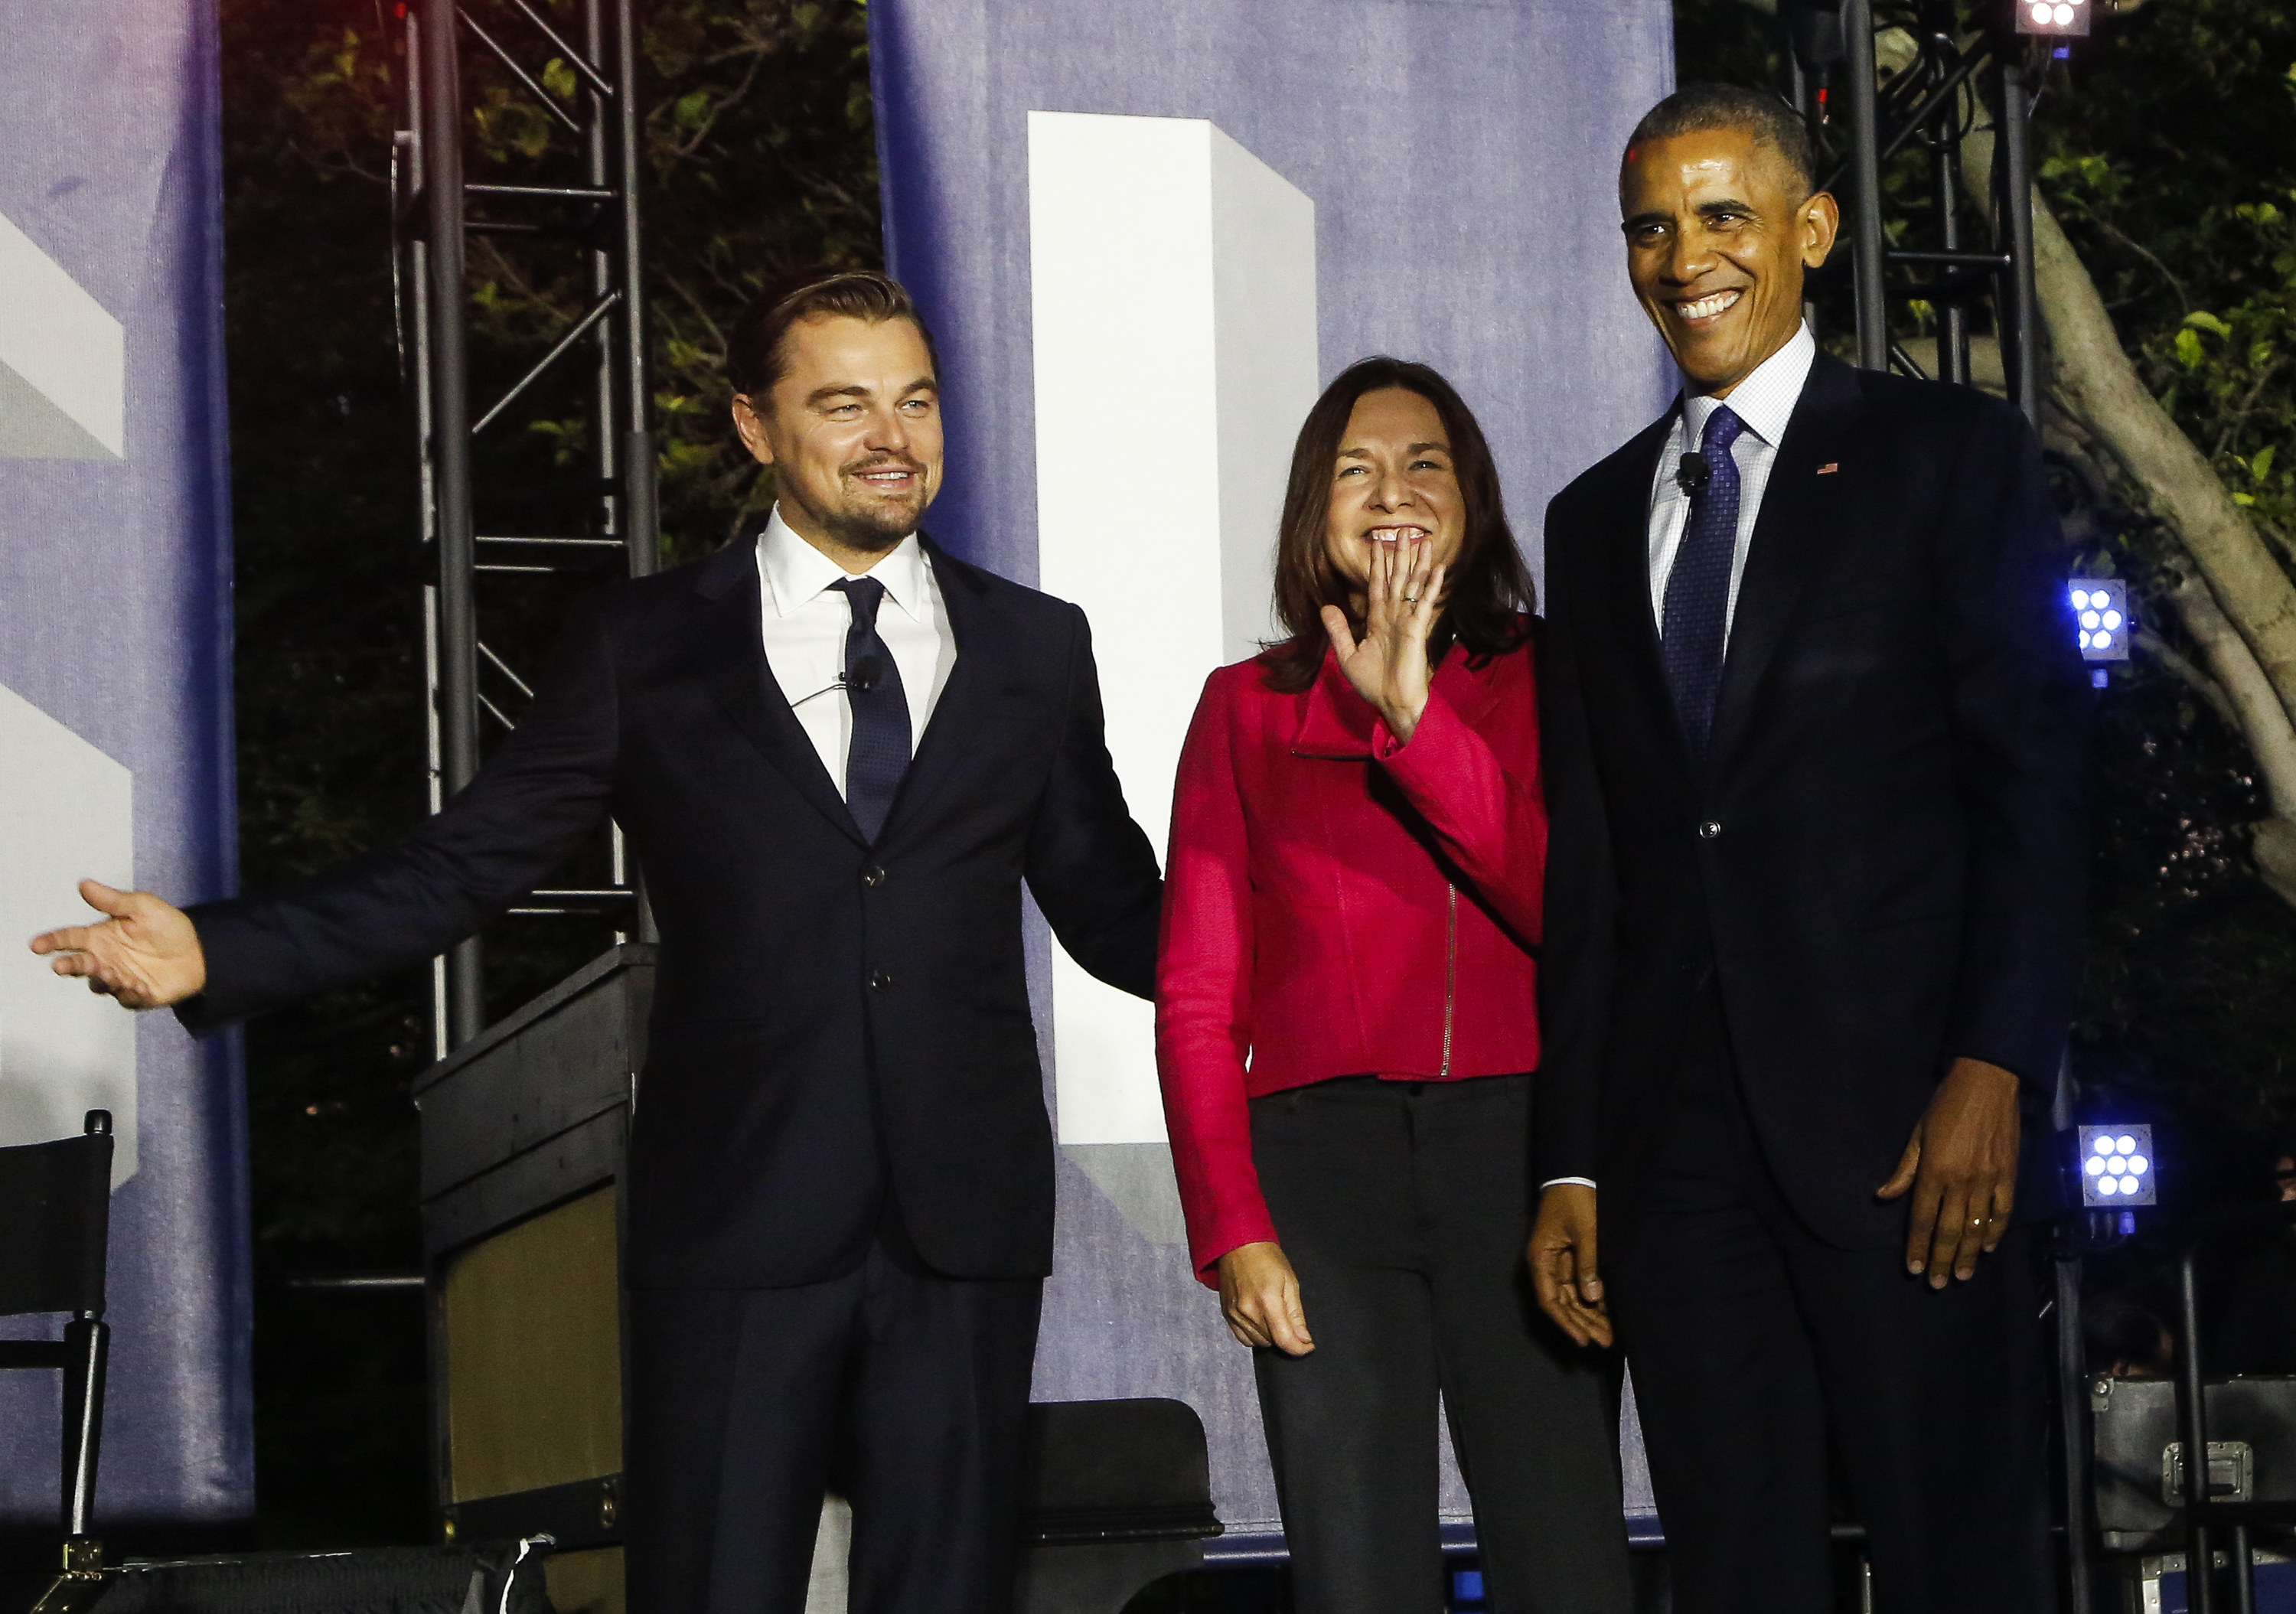 U.S President Barack Obama, Leonardo DiCaprio and Dr. Katharine Hayhoe arrive at a panel discussion on climate change as part of the White House South by South Lawn event, in the South Lawn of the White House on October 3, 2016 in Washington DC